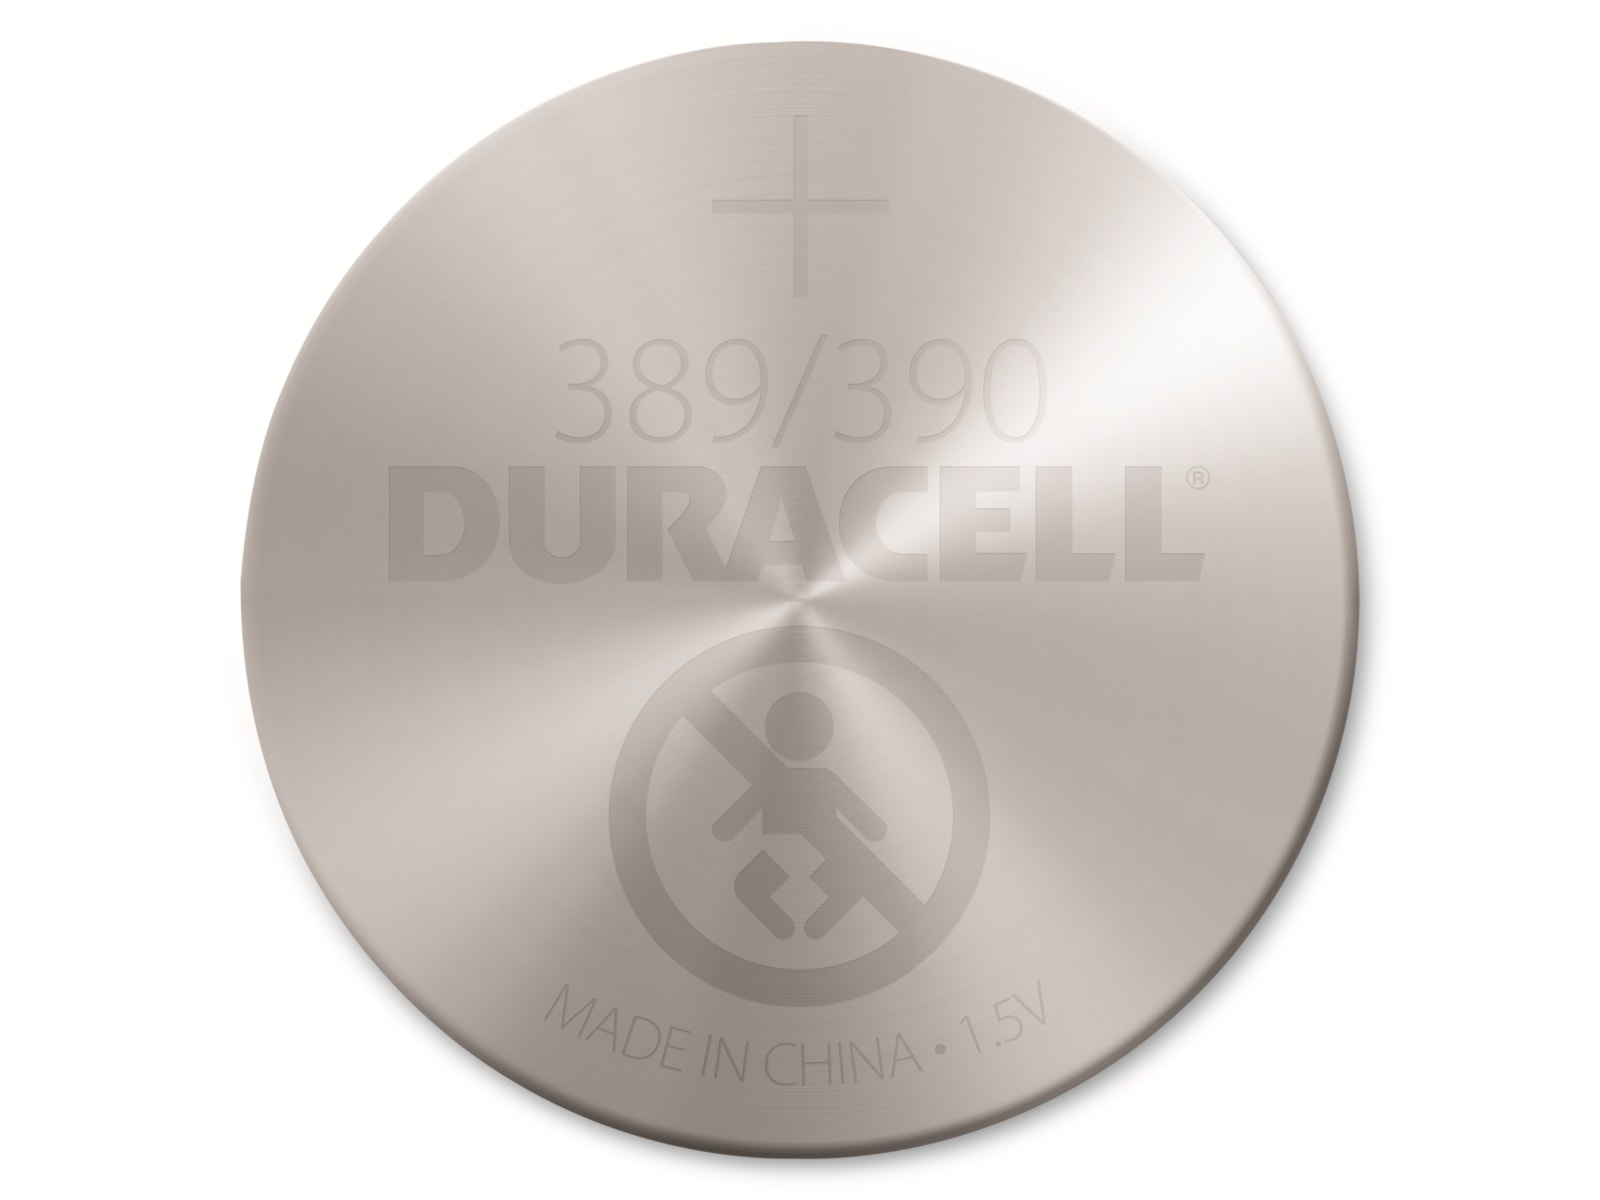 DURACELL Silver Oxide-Knopfzelle SR54, 1.5V, Watch